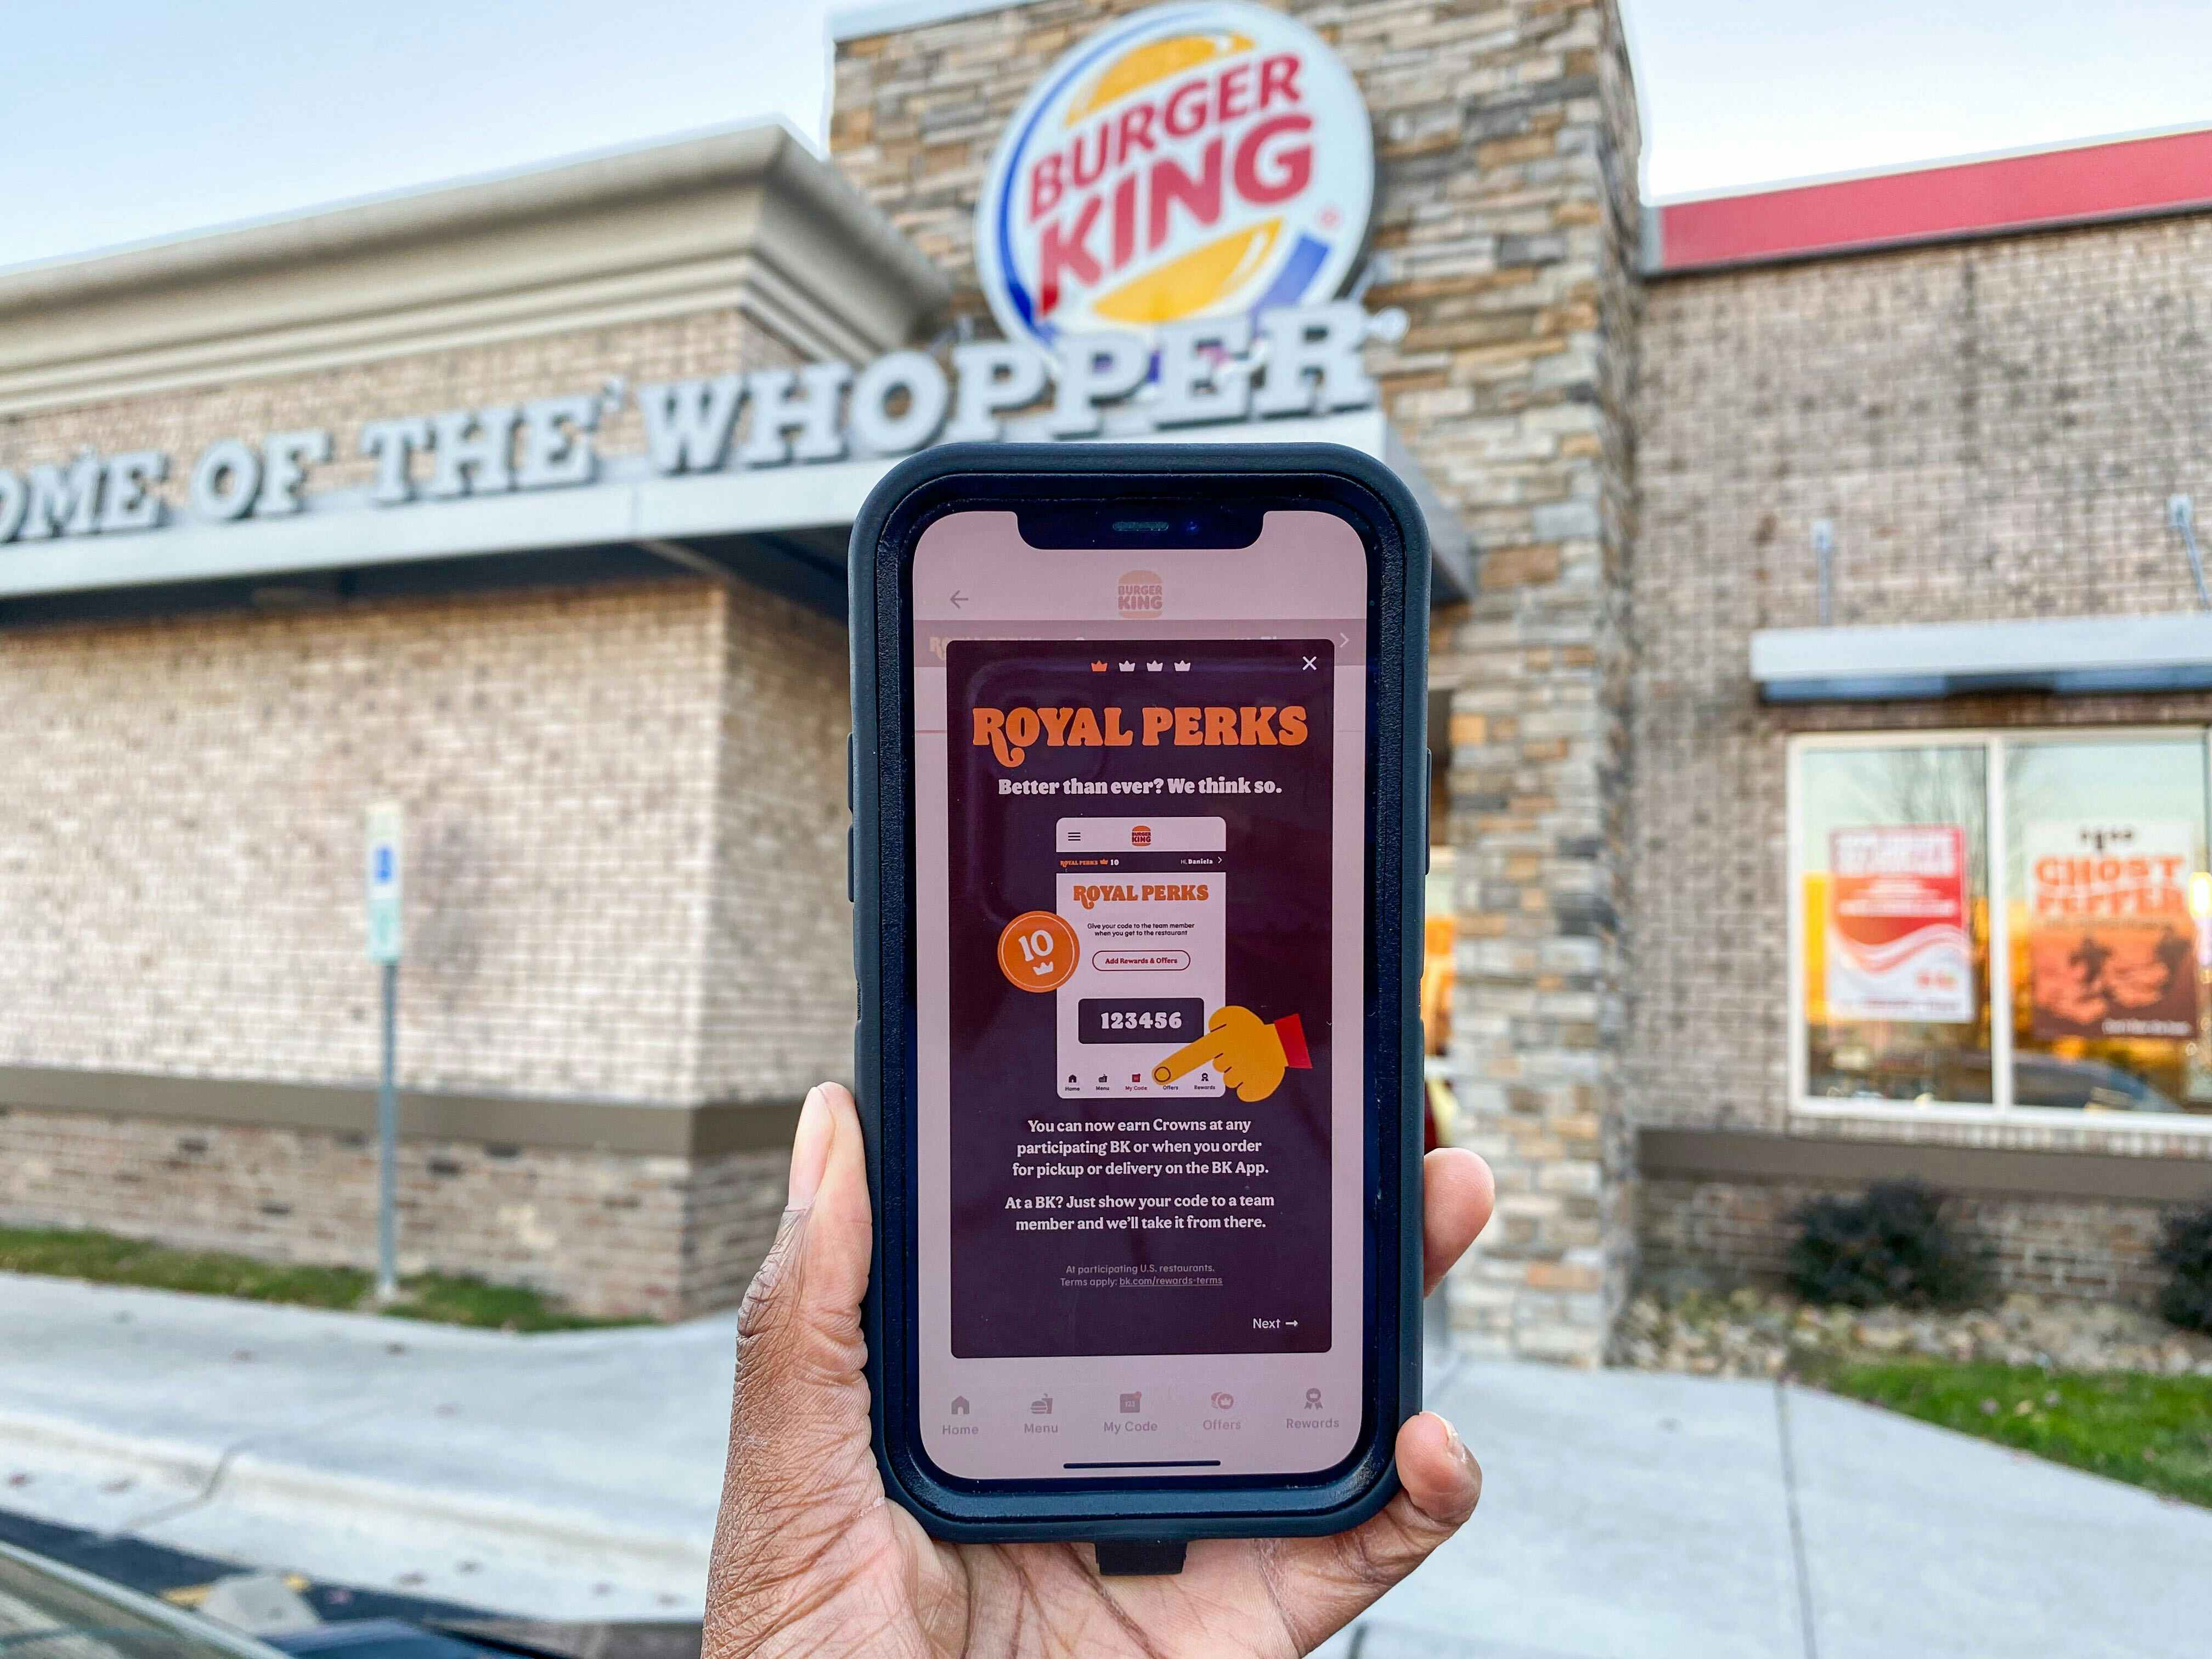 A cell phone displaying the Burger King Royal Perks app being held up in front of a Burger King restaurant storefront.